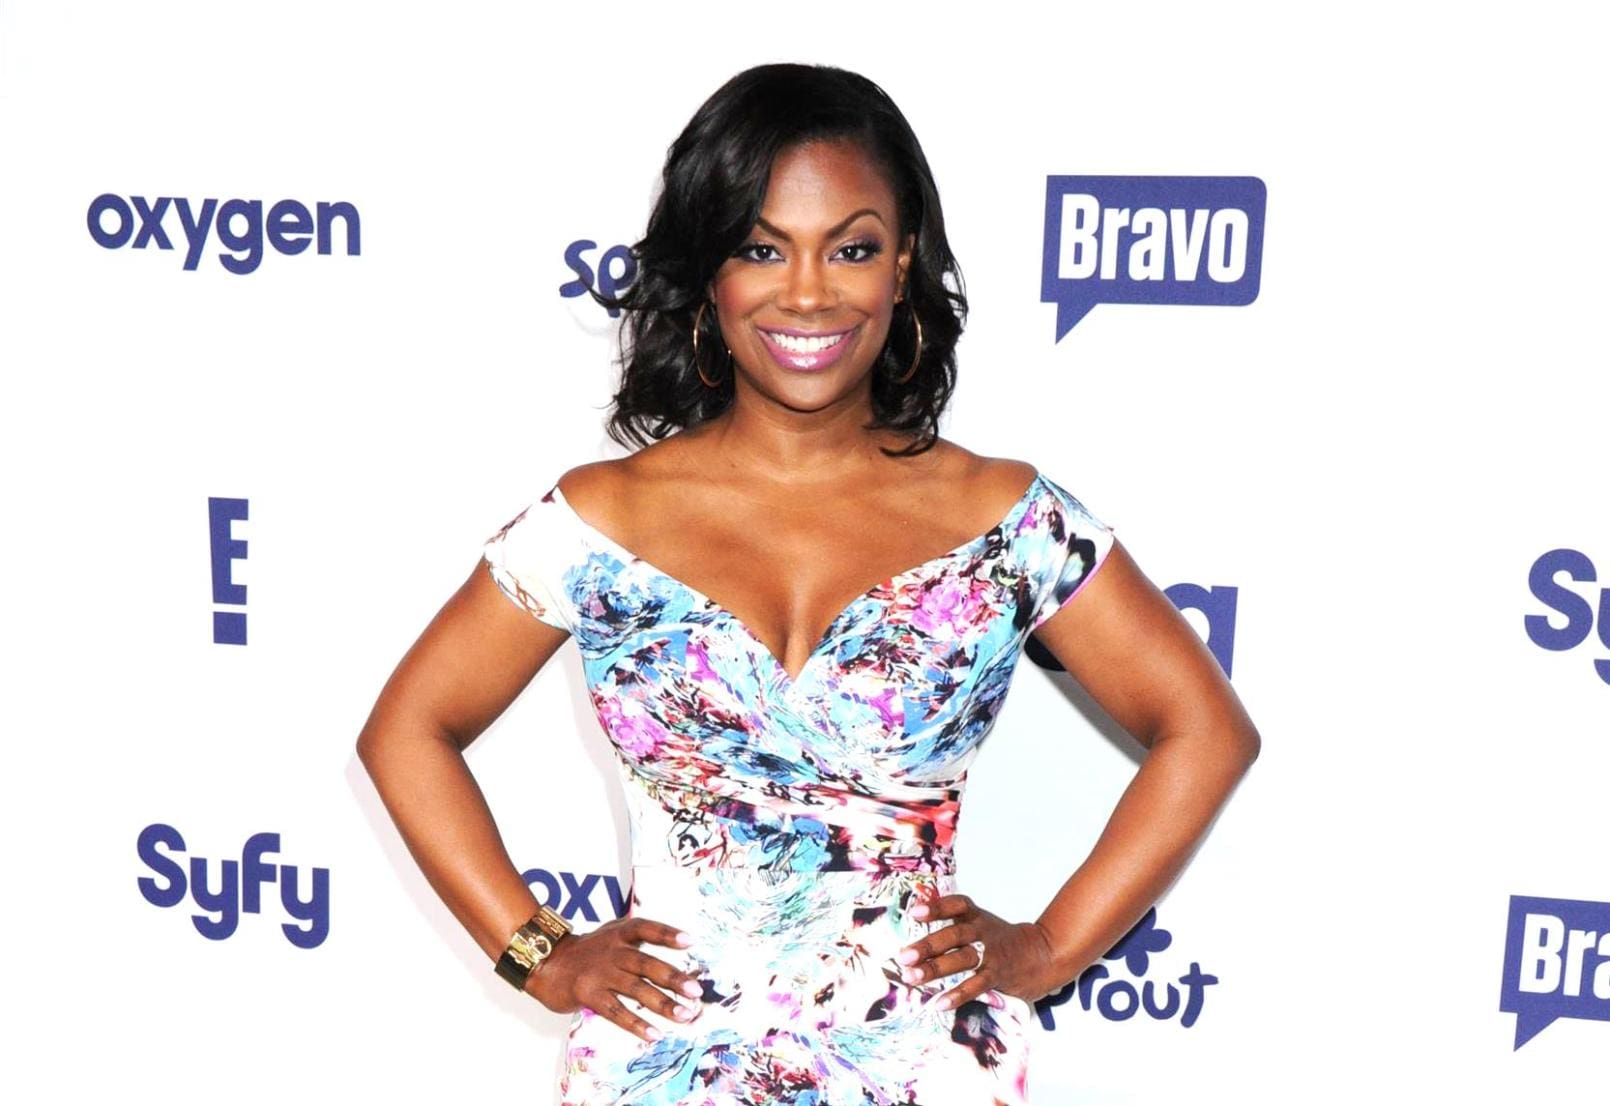 Kandi Burruss Promotes A New Movie And Fans Love How Supportive She Is